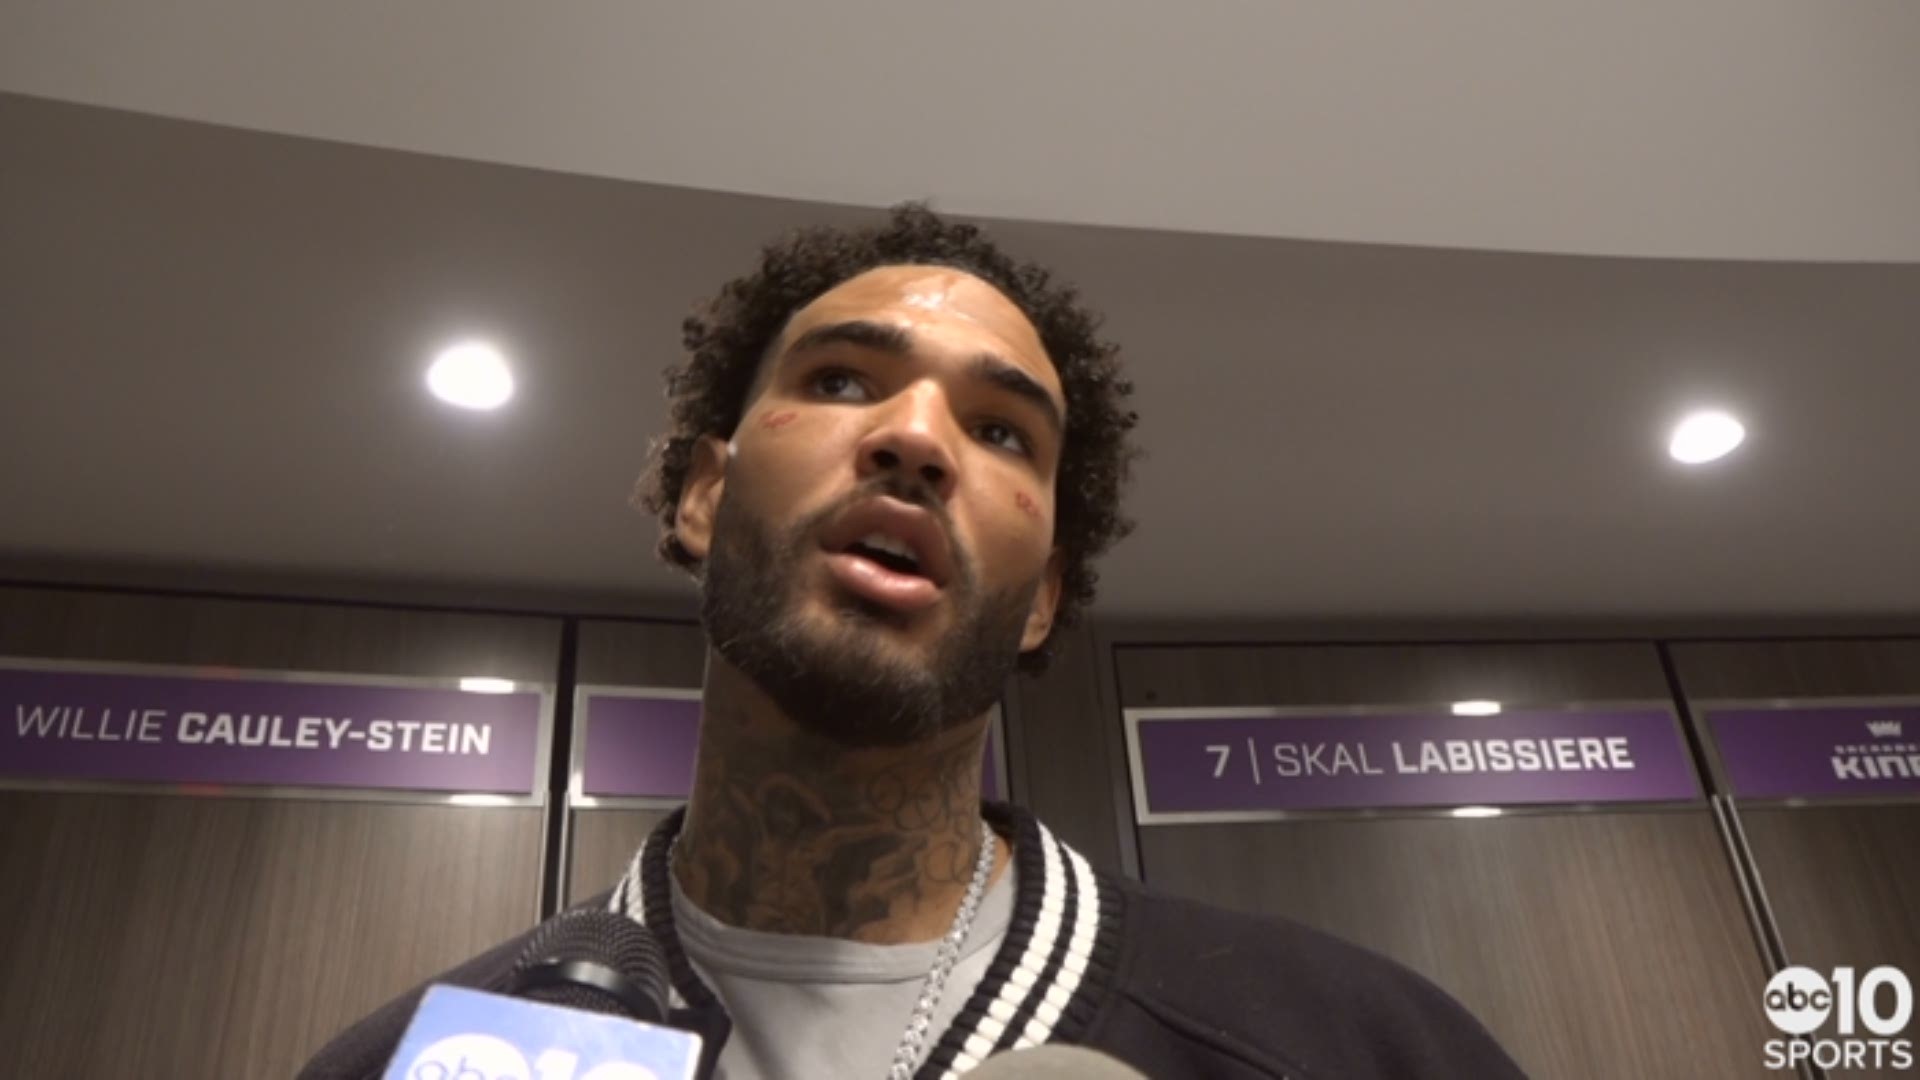 Kings center Willie Cauley-Stein was not pleased with his team's defensive play following Thursday night's loss at home to the Los Angeles Clippers.